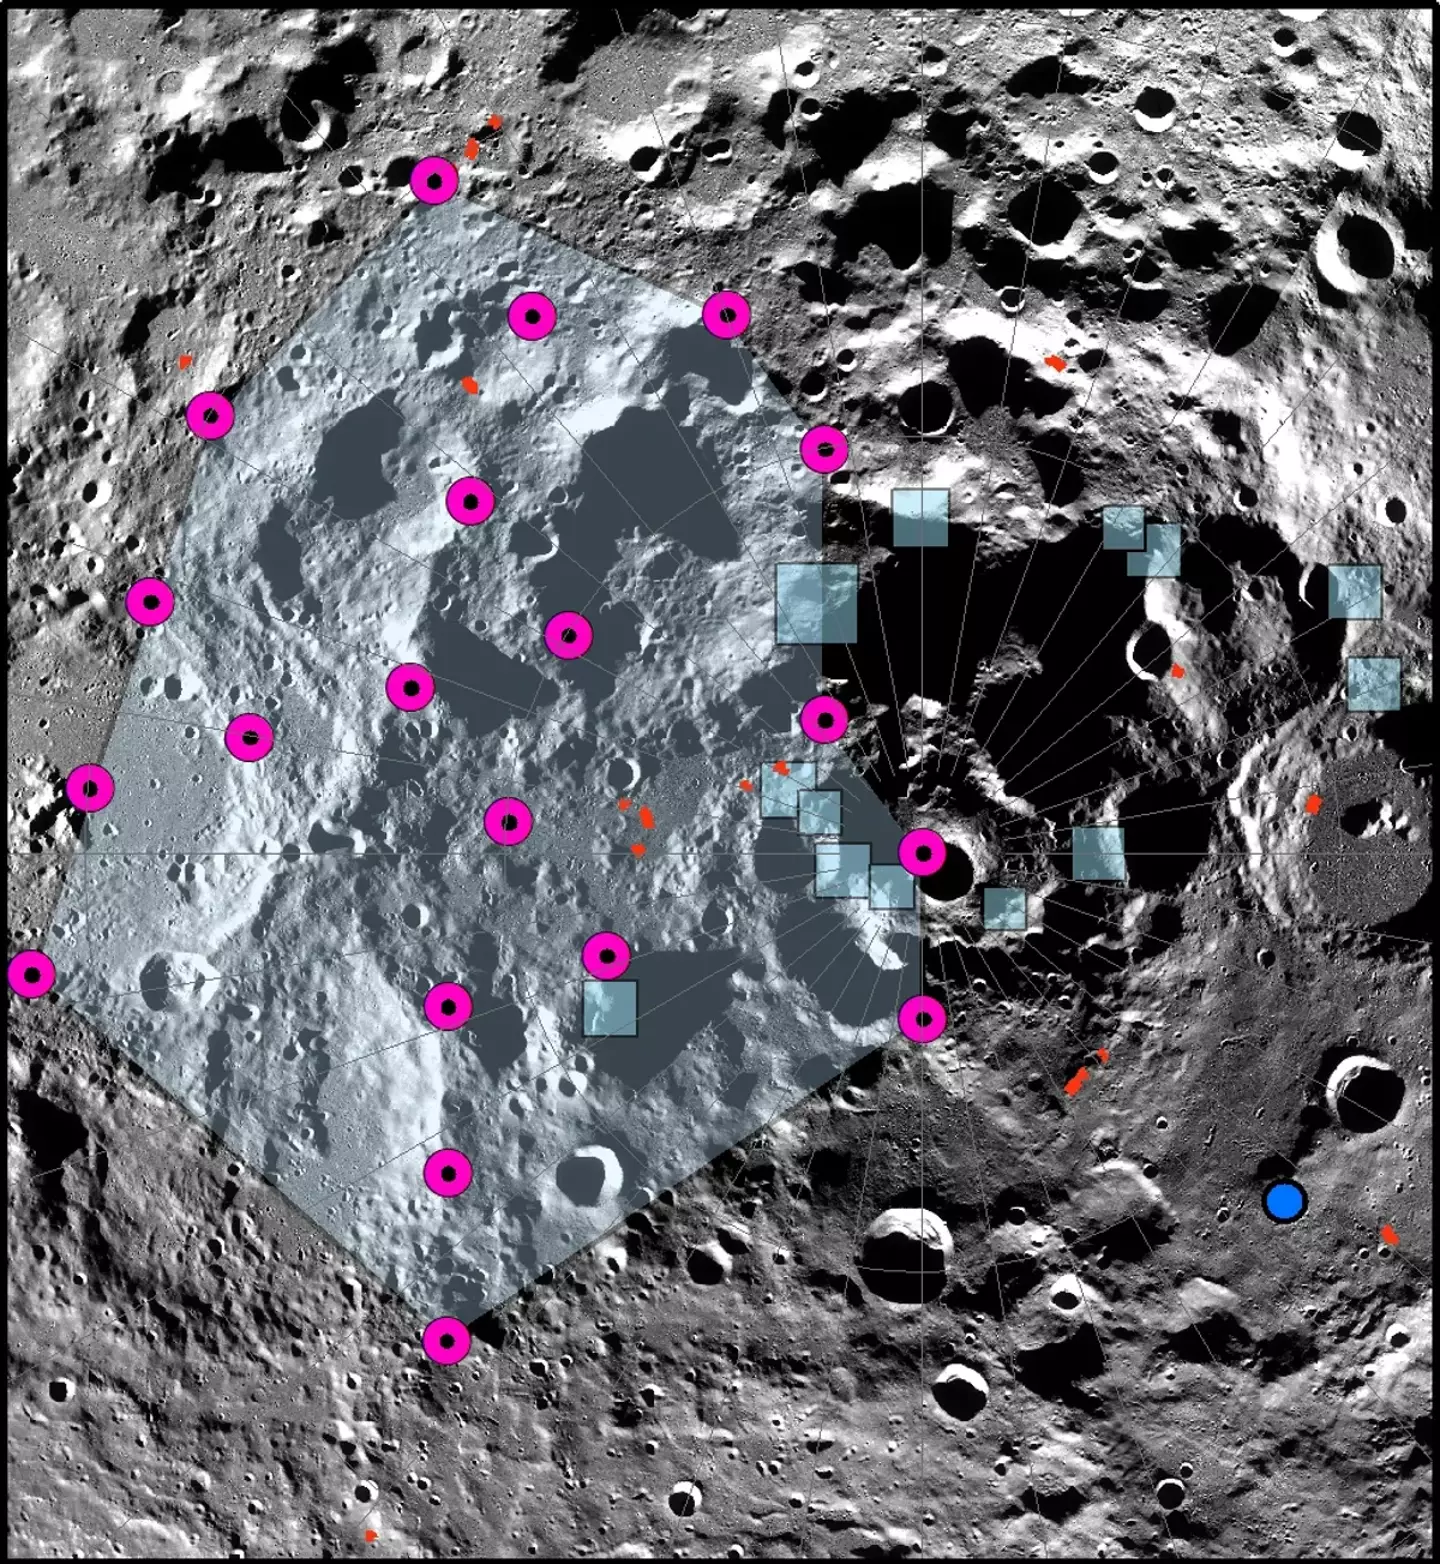 NASA's Artemis III is planned to land where the blue dot is. The pink dots represent possible epicenters of the moonquake at the South Pole.